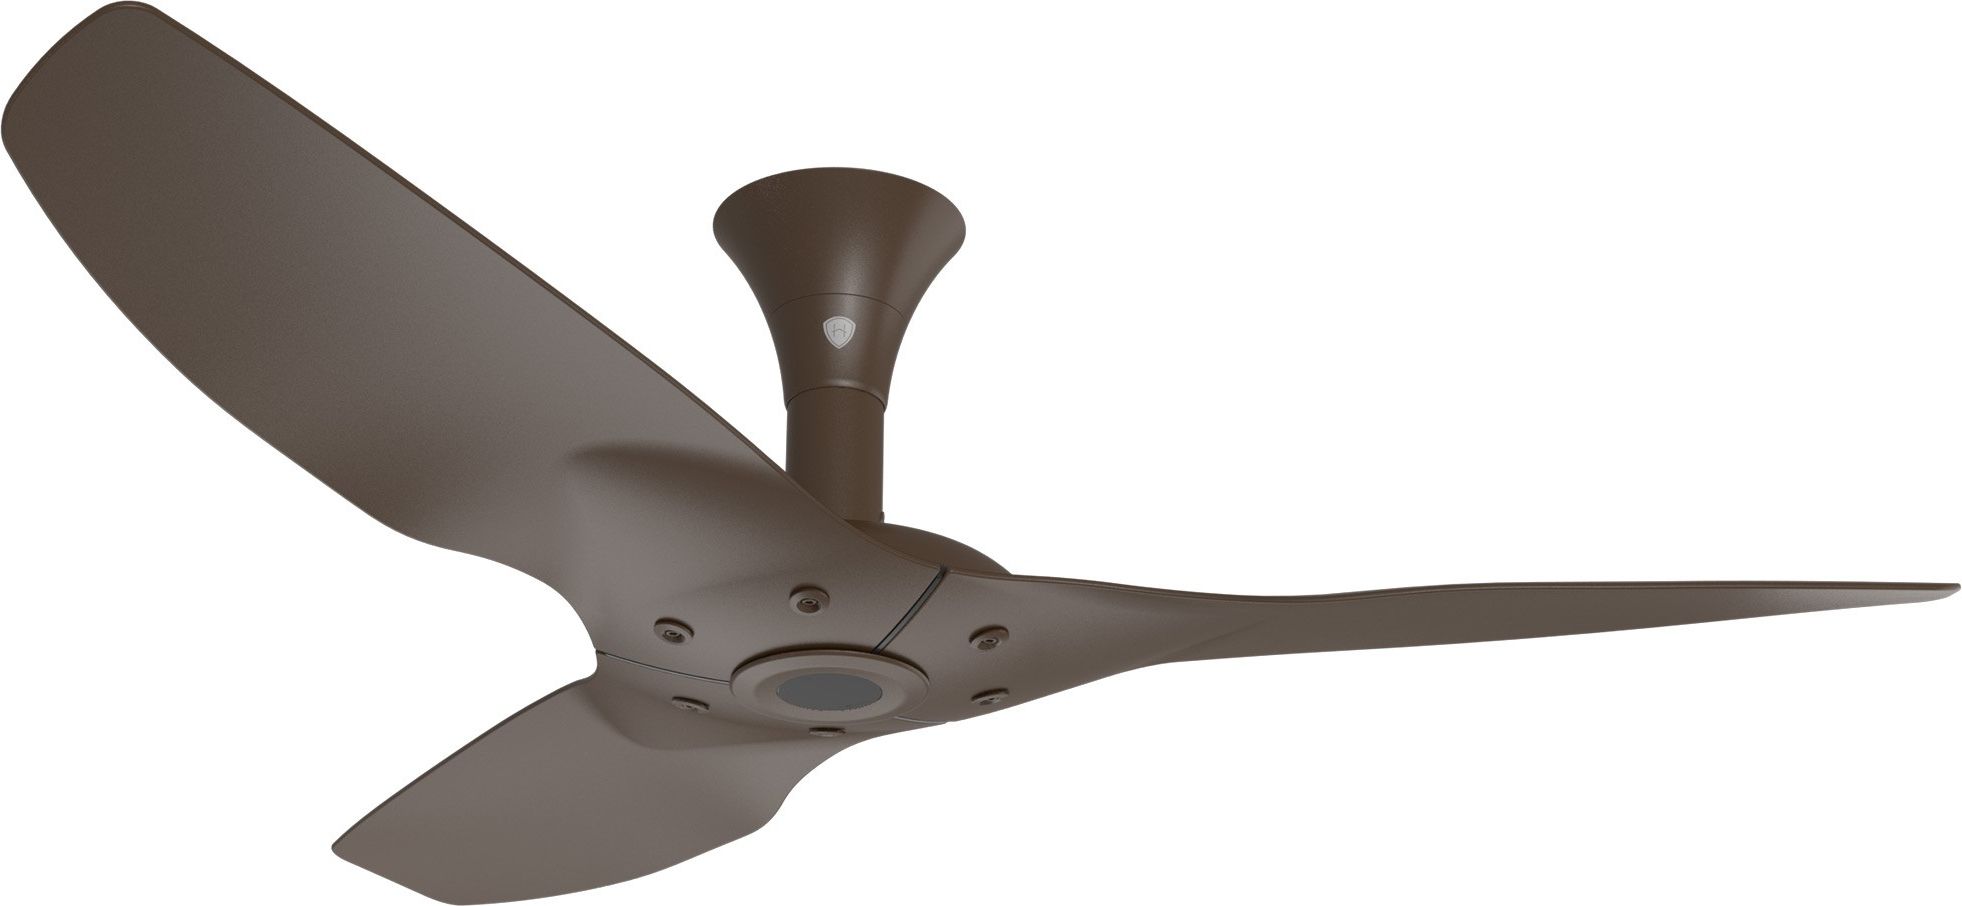 Outdoor Ceiling Fans With Covers In Favorite Haiku Outdoor Ceiling Fan: 52", Oil Rubbed Bronze Full Appearance (View 1 of 20)